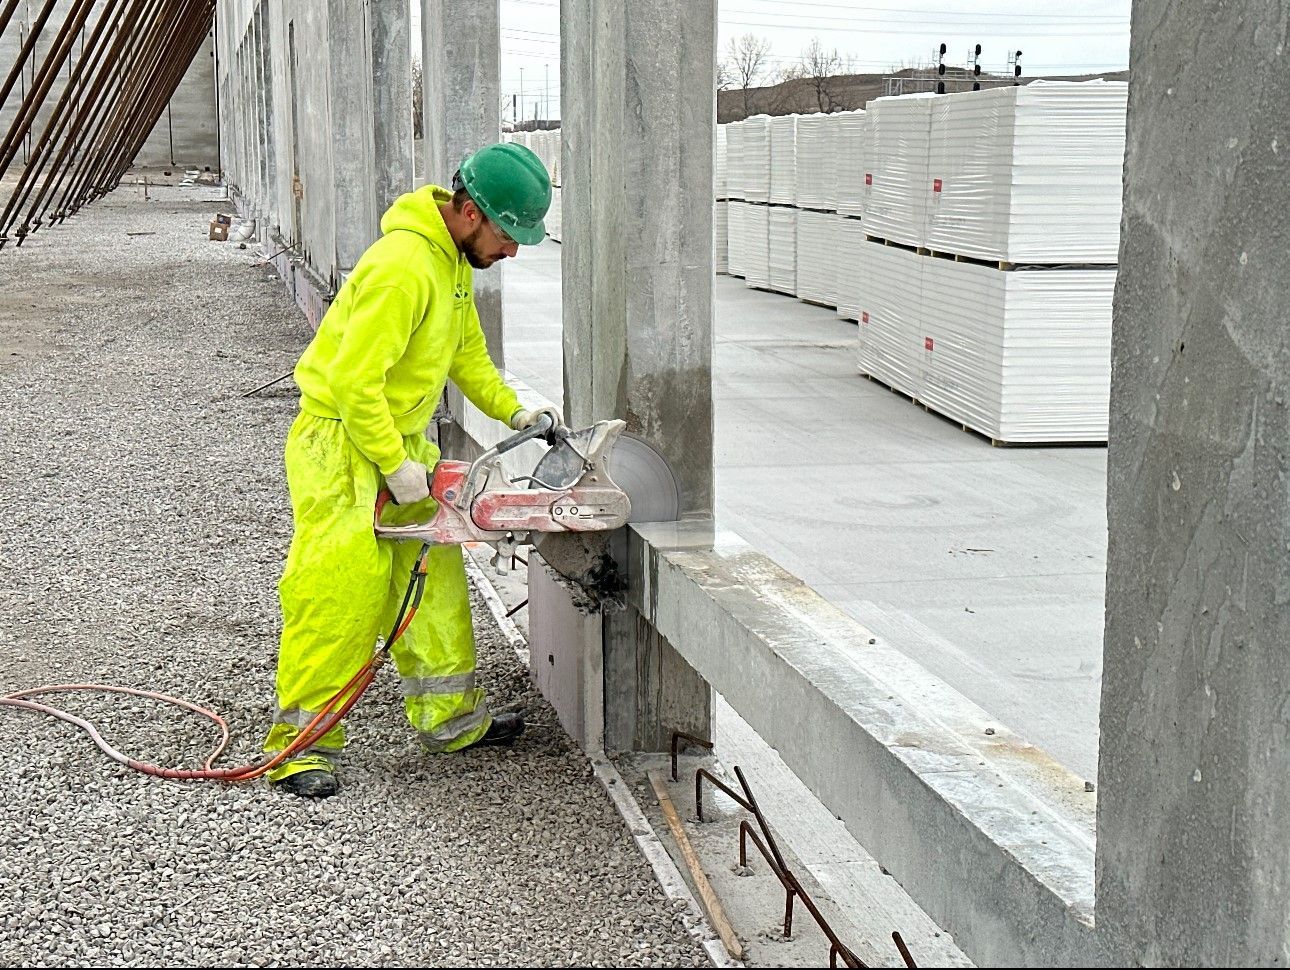 A construction worker is cutting a concrete wall with a saw.